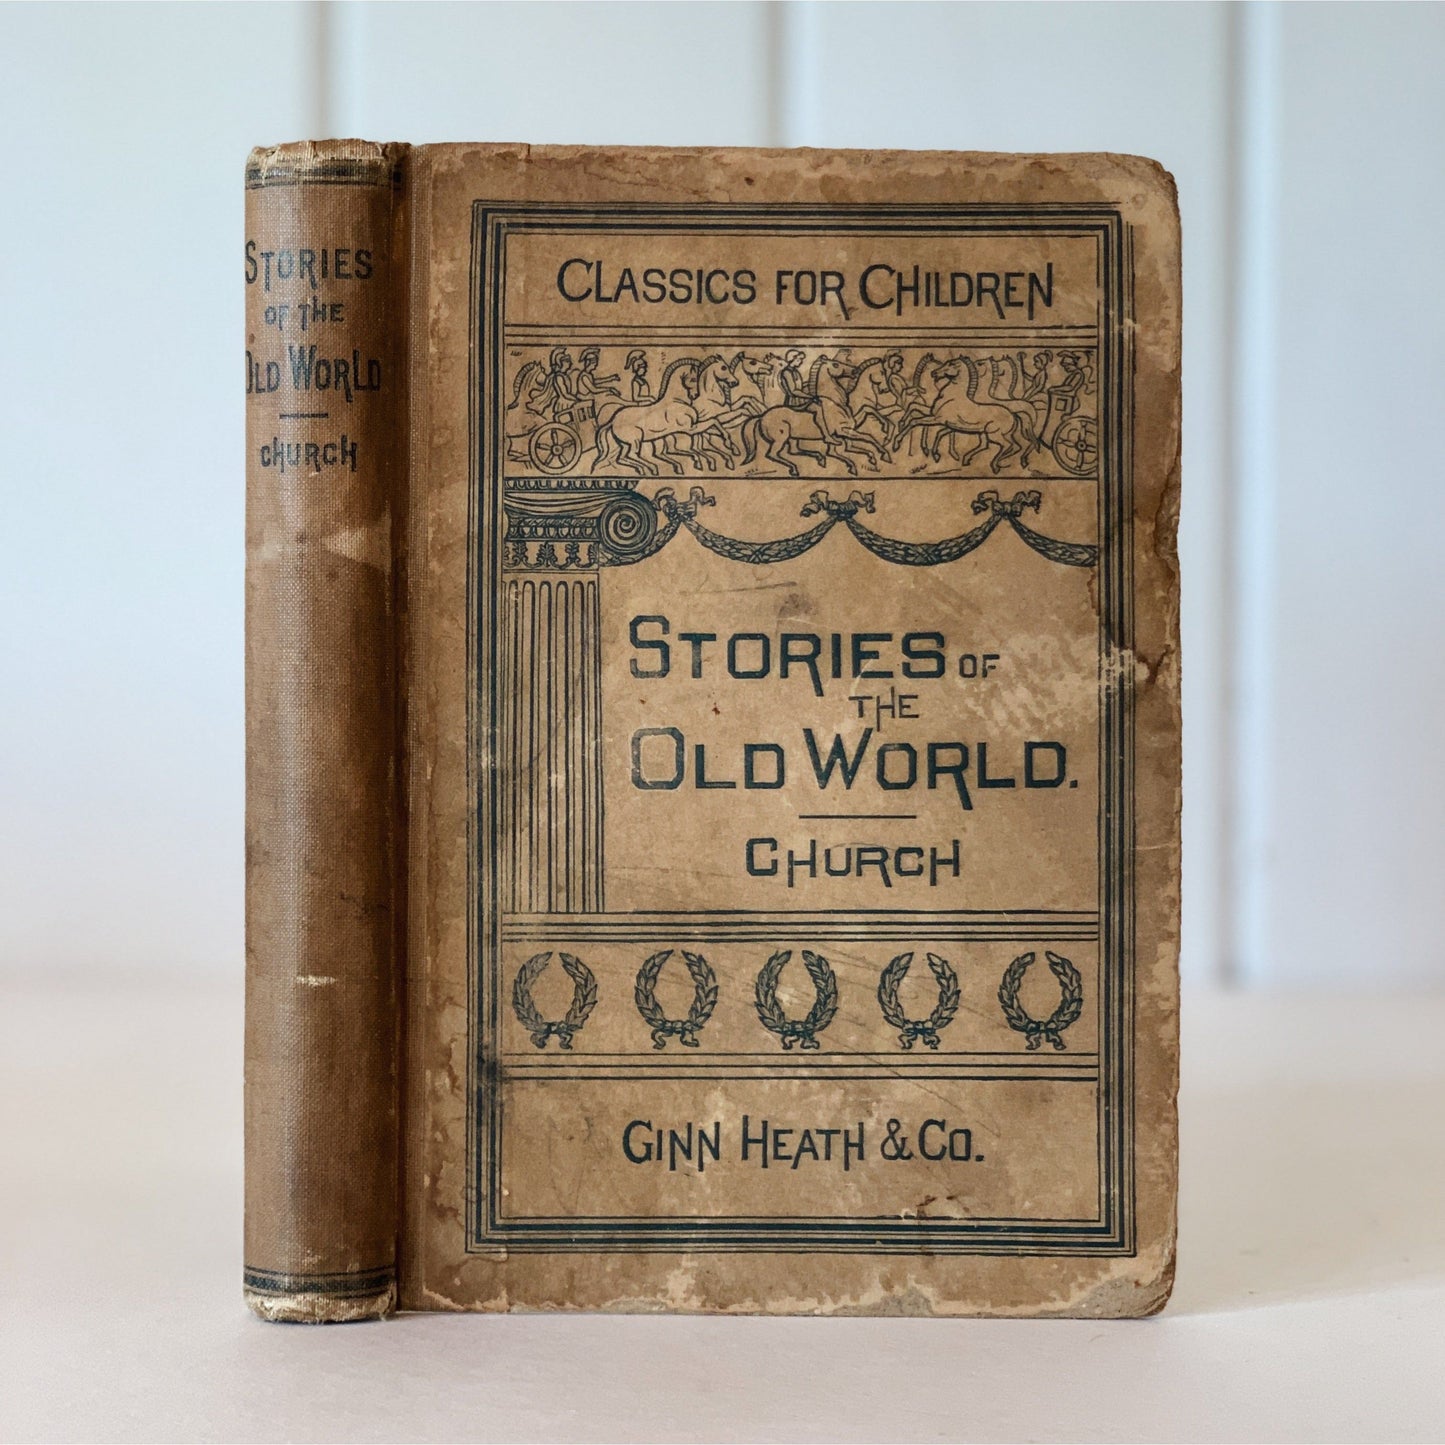 Stories of the Old World - Classics for Children - Antique School Book